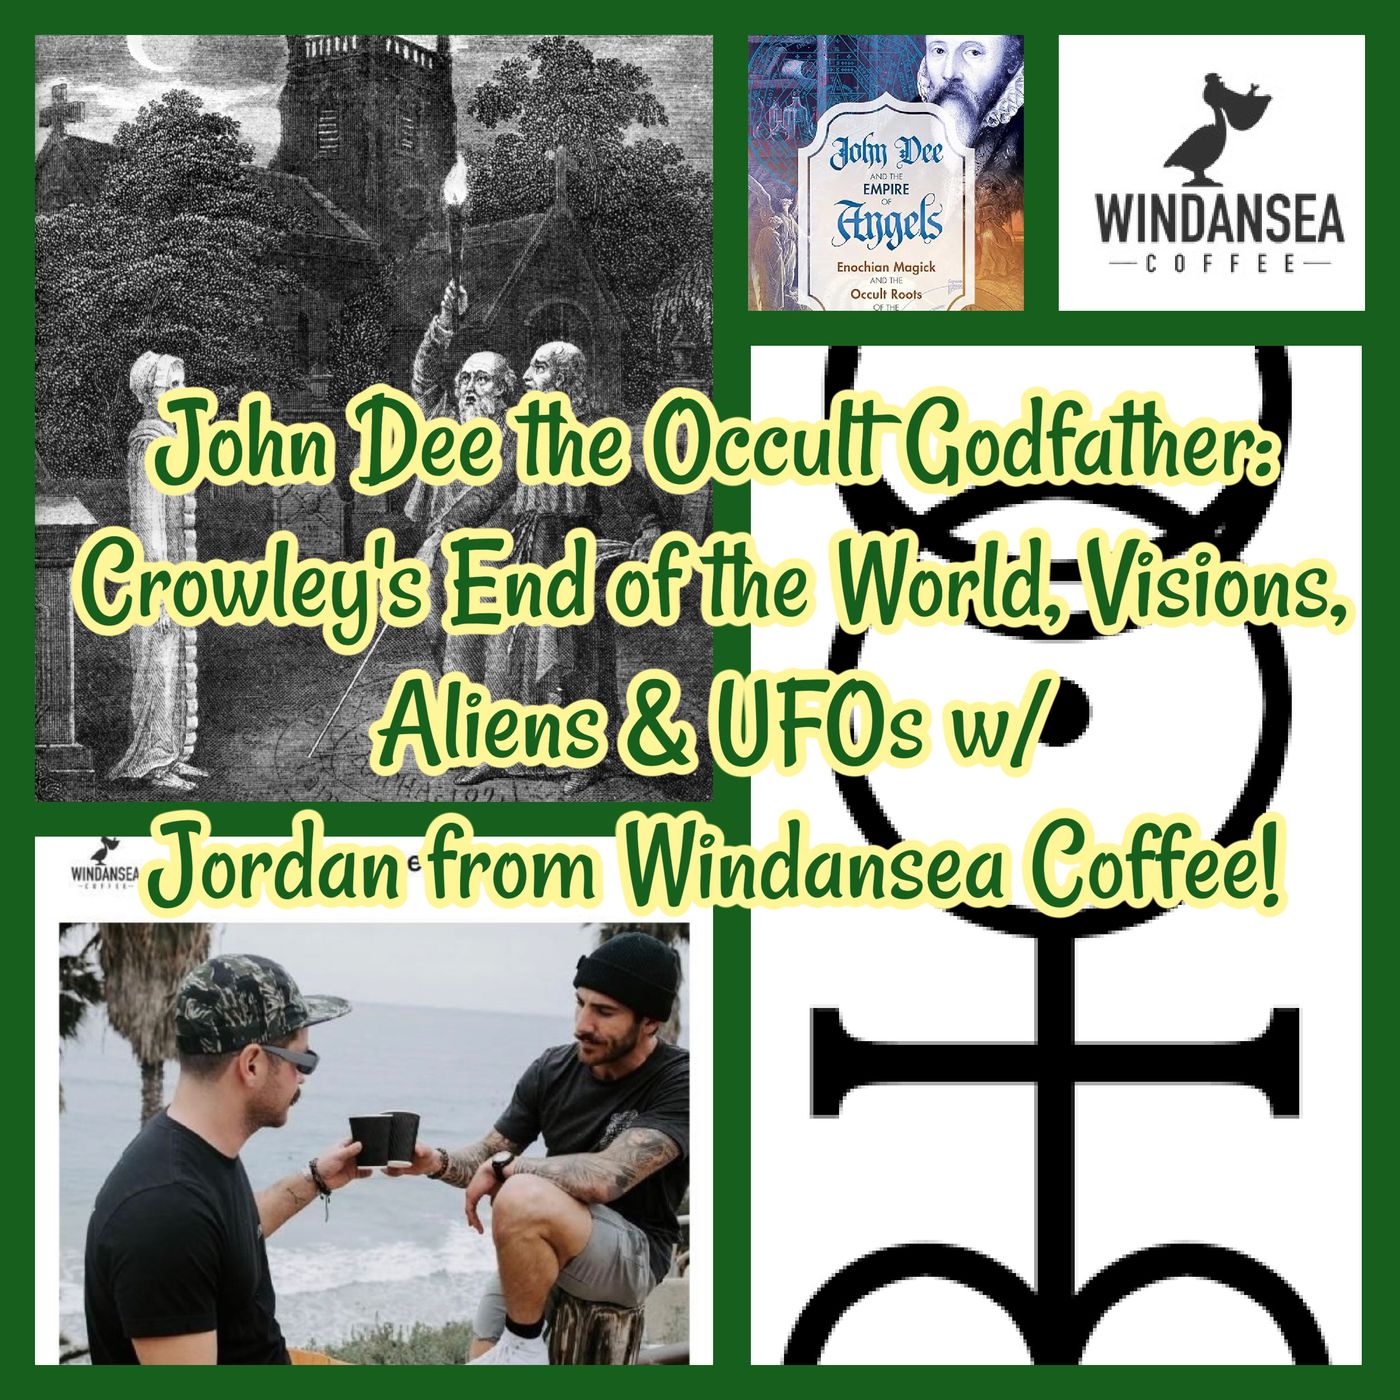 John Dee the Occult Godfather: Crowley's End of the World, Visions, Aliens & UFOs w/ Jordan from Windansea Coffee!